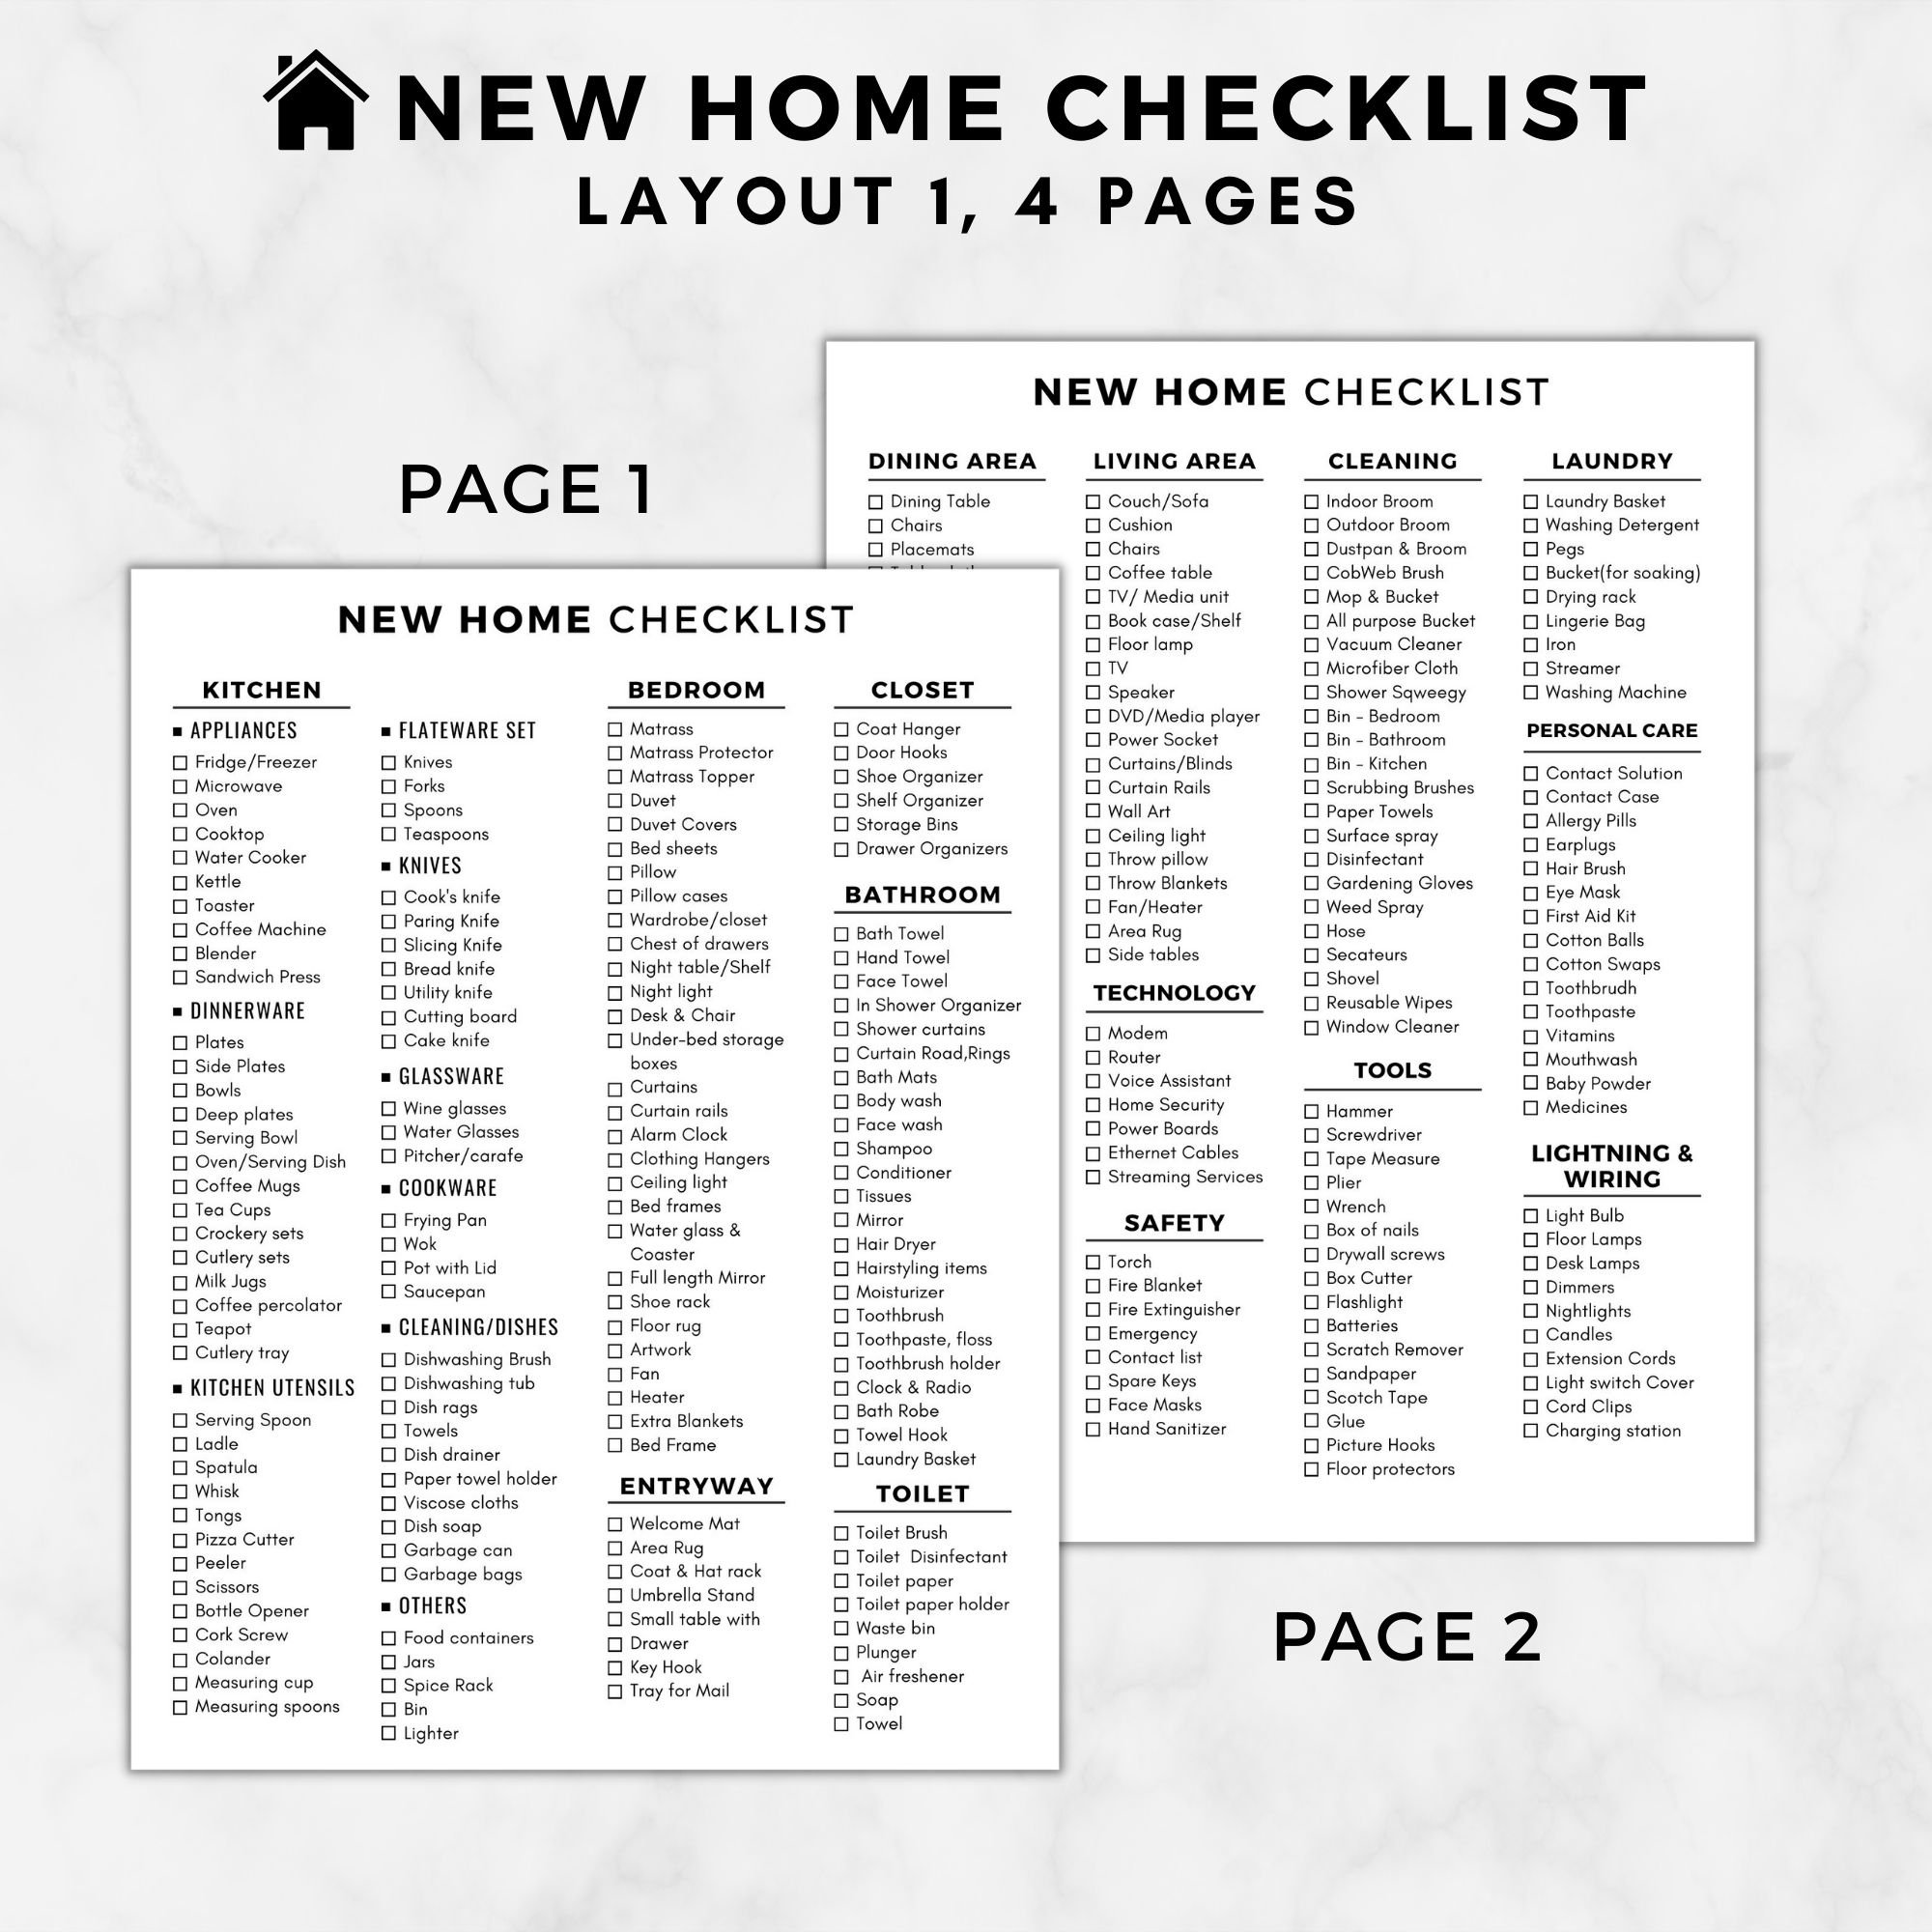 Your Checklist of Top New Home Essentials